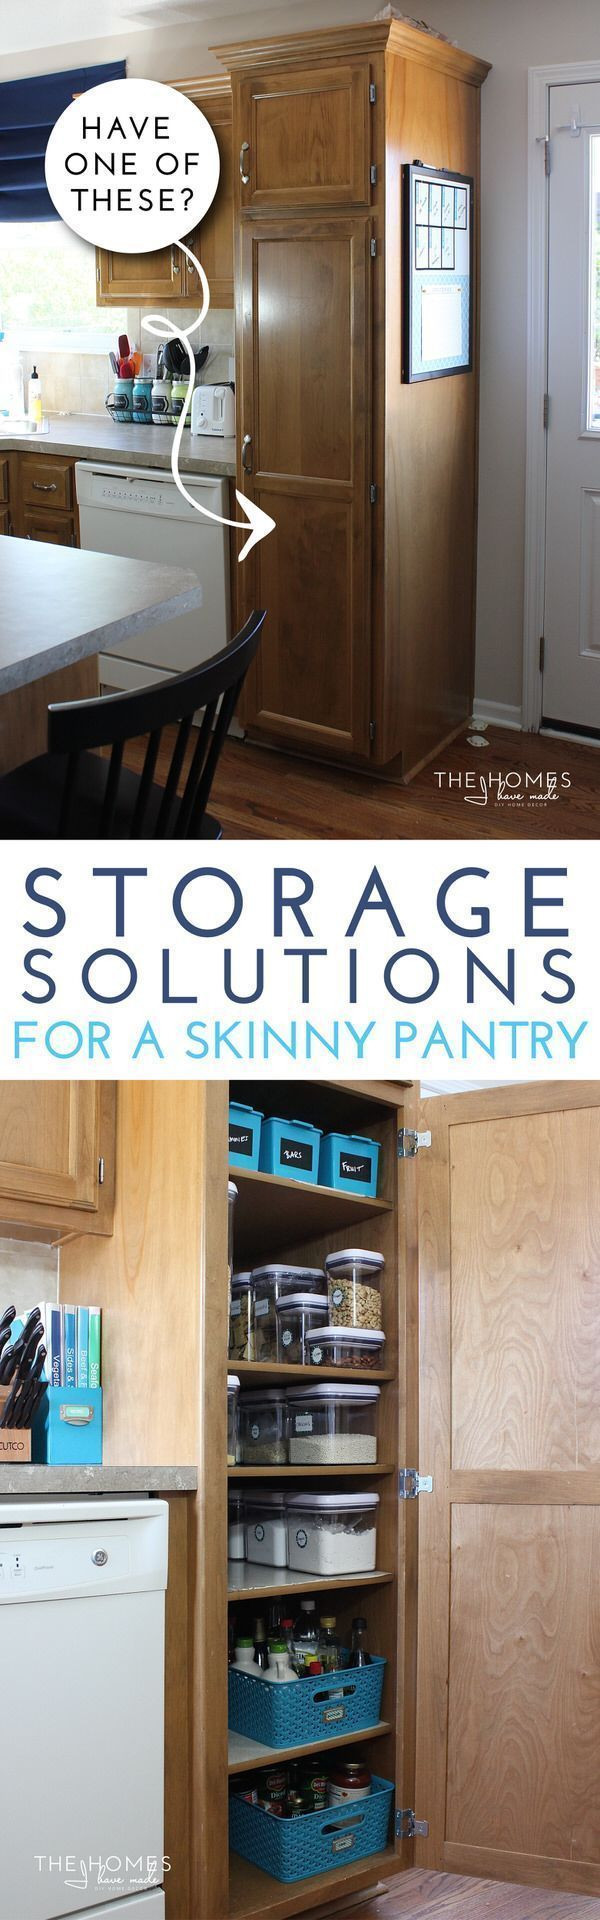 21 Ideal Bsl Hardwood Floors Canada 2024 free download bsl hardwood floors canada of 67 best law school images on pinterest law school avocado and pertaining to organize this storage solutions for a skinny pantry